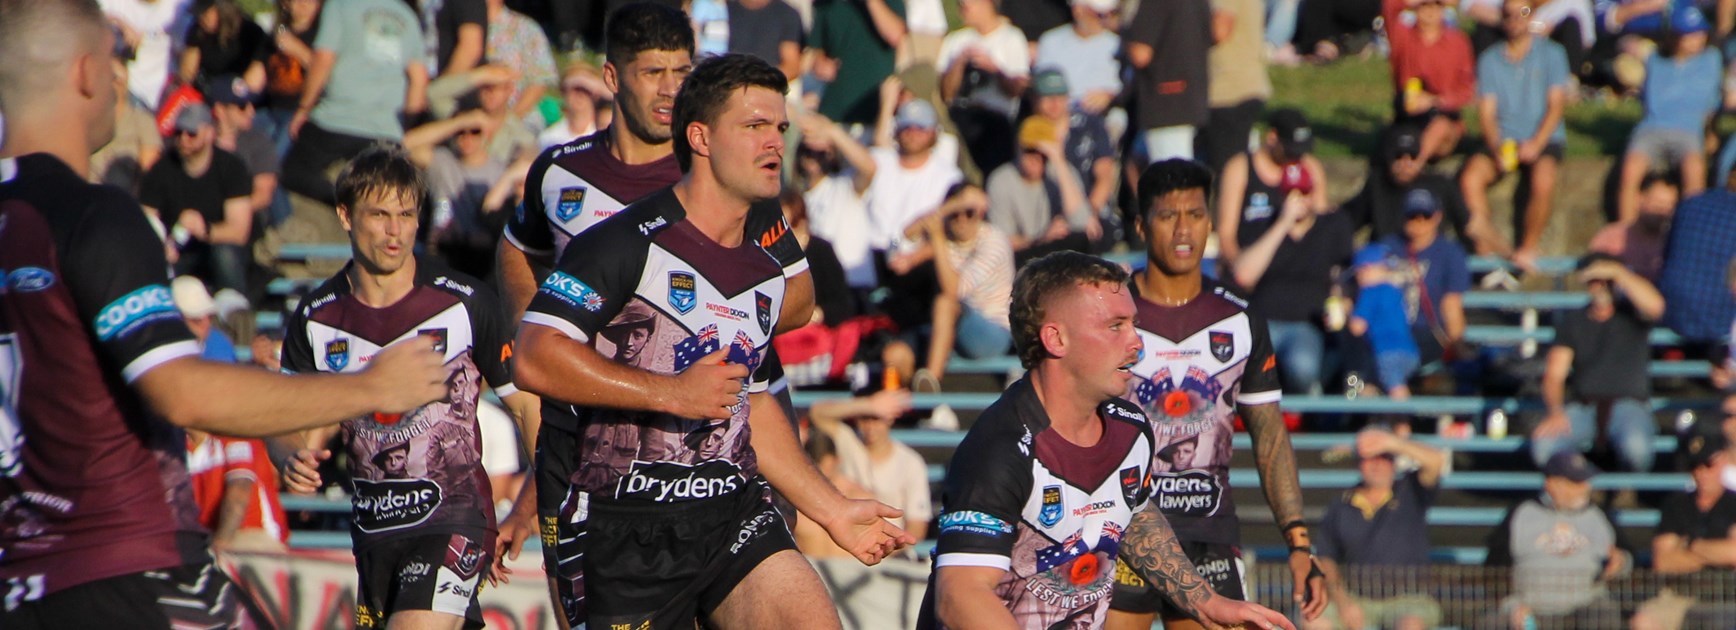 Rd 8 Preview: Blacktown Workers vs South Sydney